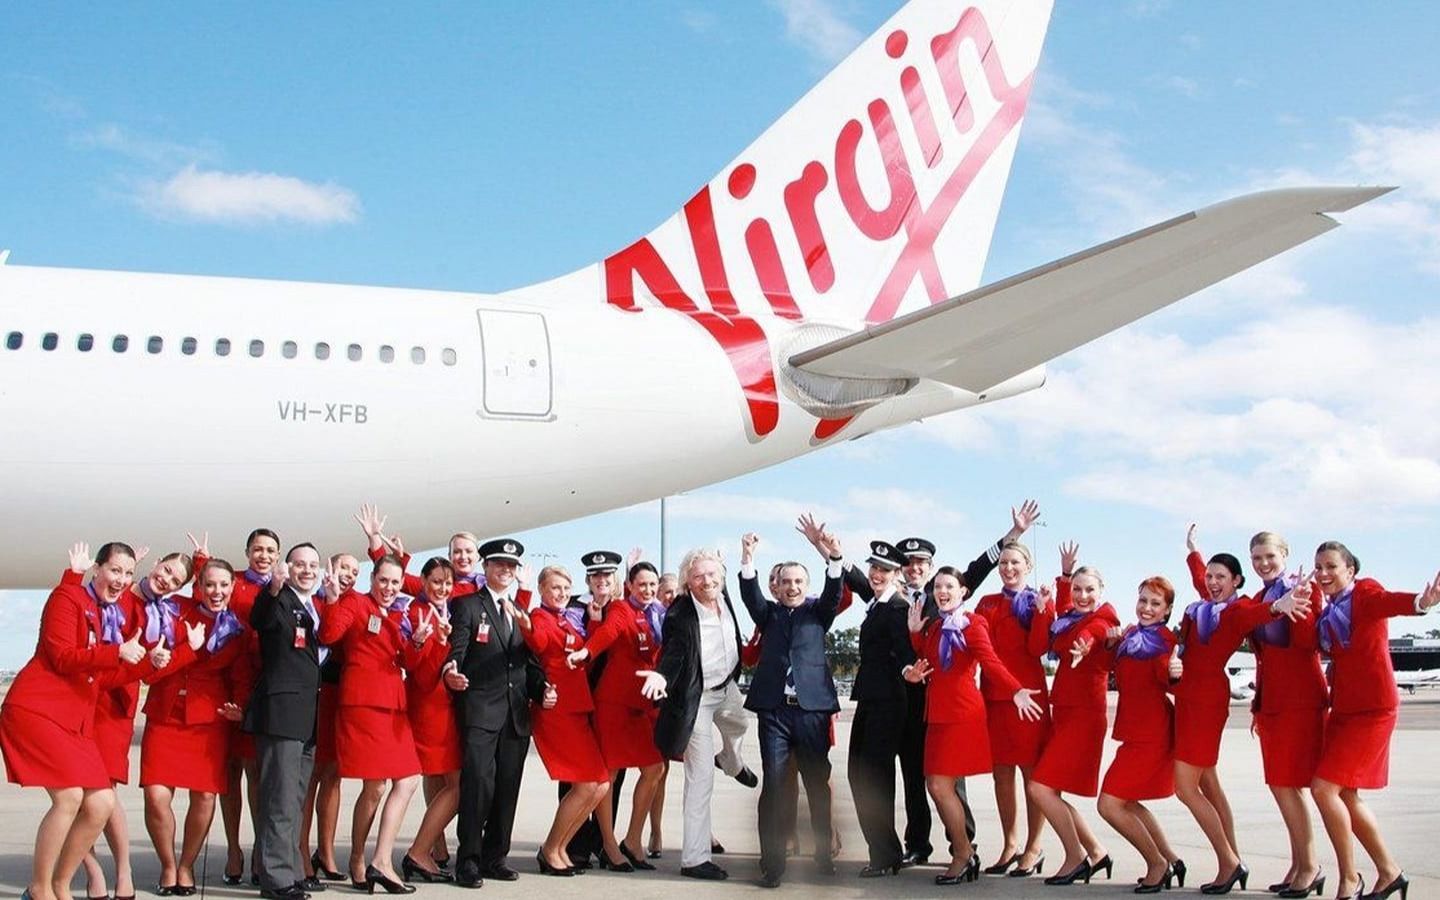 Richard Branson, Virgin Australia cabin crew and pilots stand with their arms in the air, smiling, in front of a Virgin Australia plane